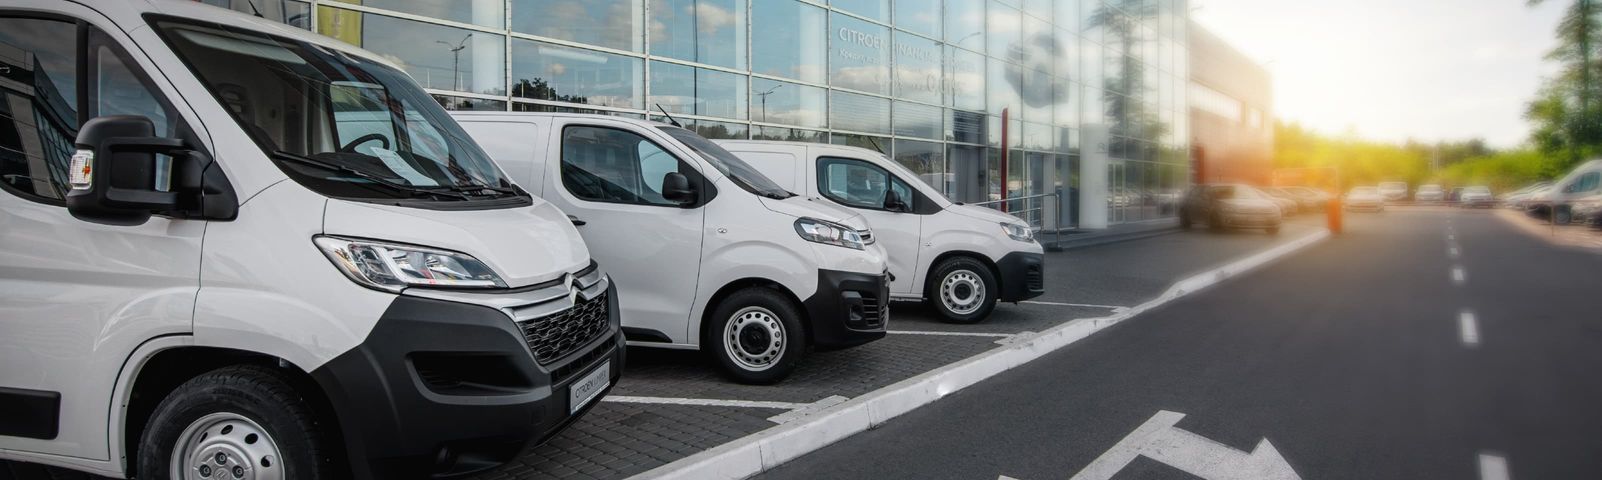 Our round up of the 3 best small vans of 2022